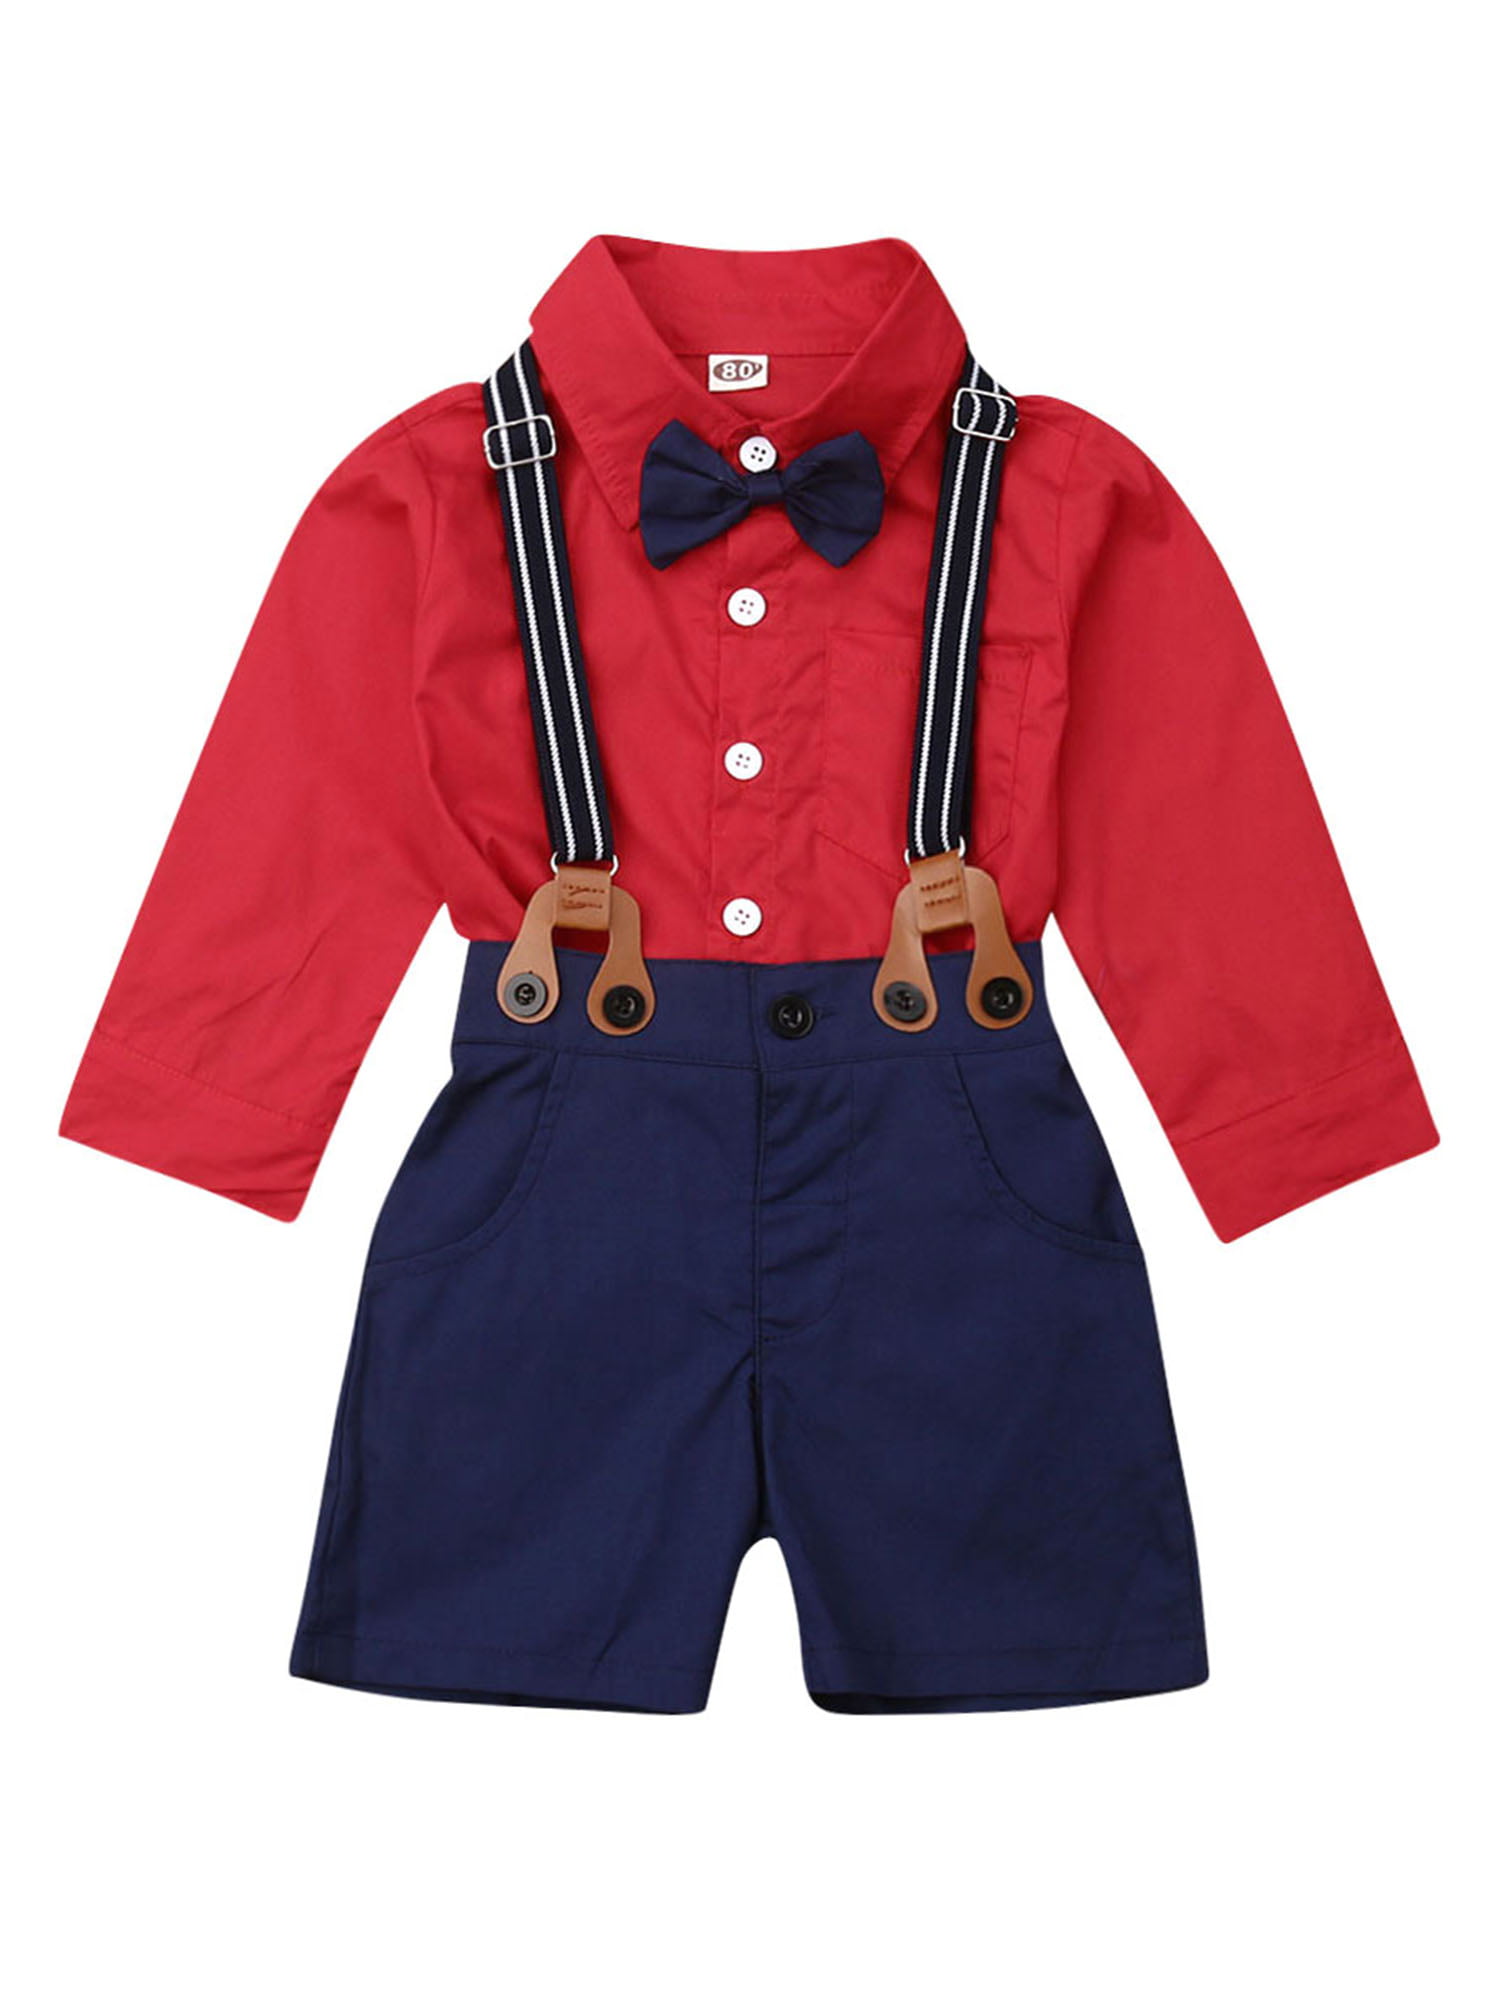 Little Toddler Boys 3Pcs Gentleman Long Sleeves Shirt+Suspender Colorful Pants+Bow Tie Outfit Clothes Set 